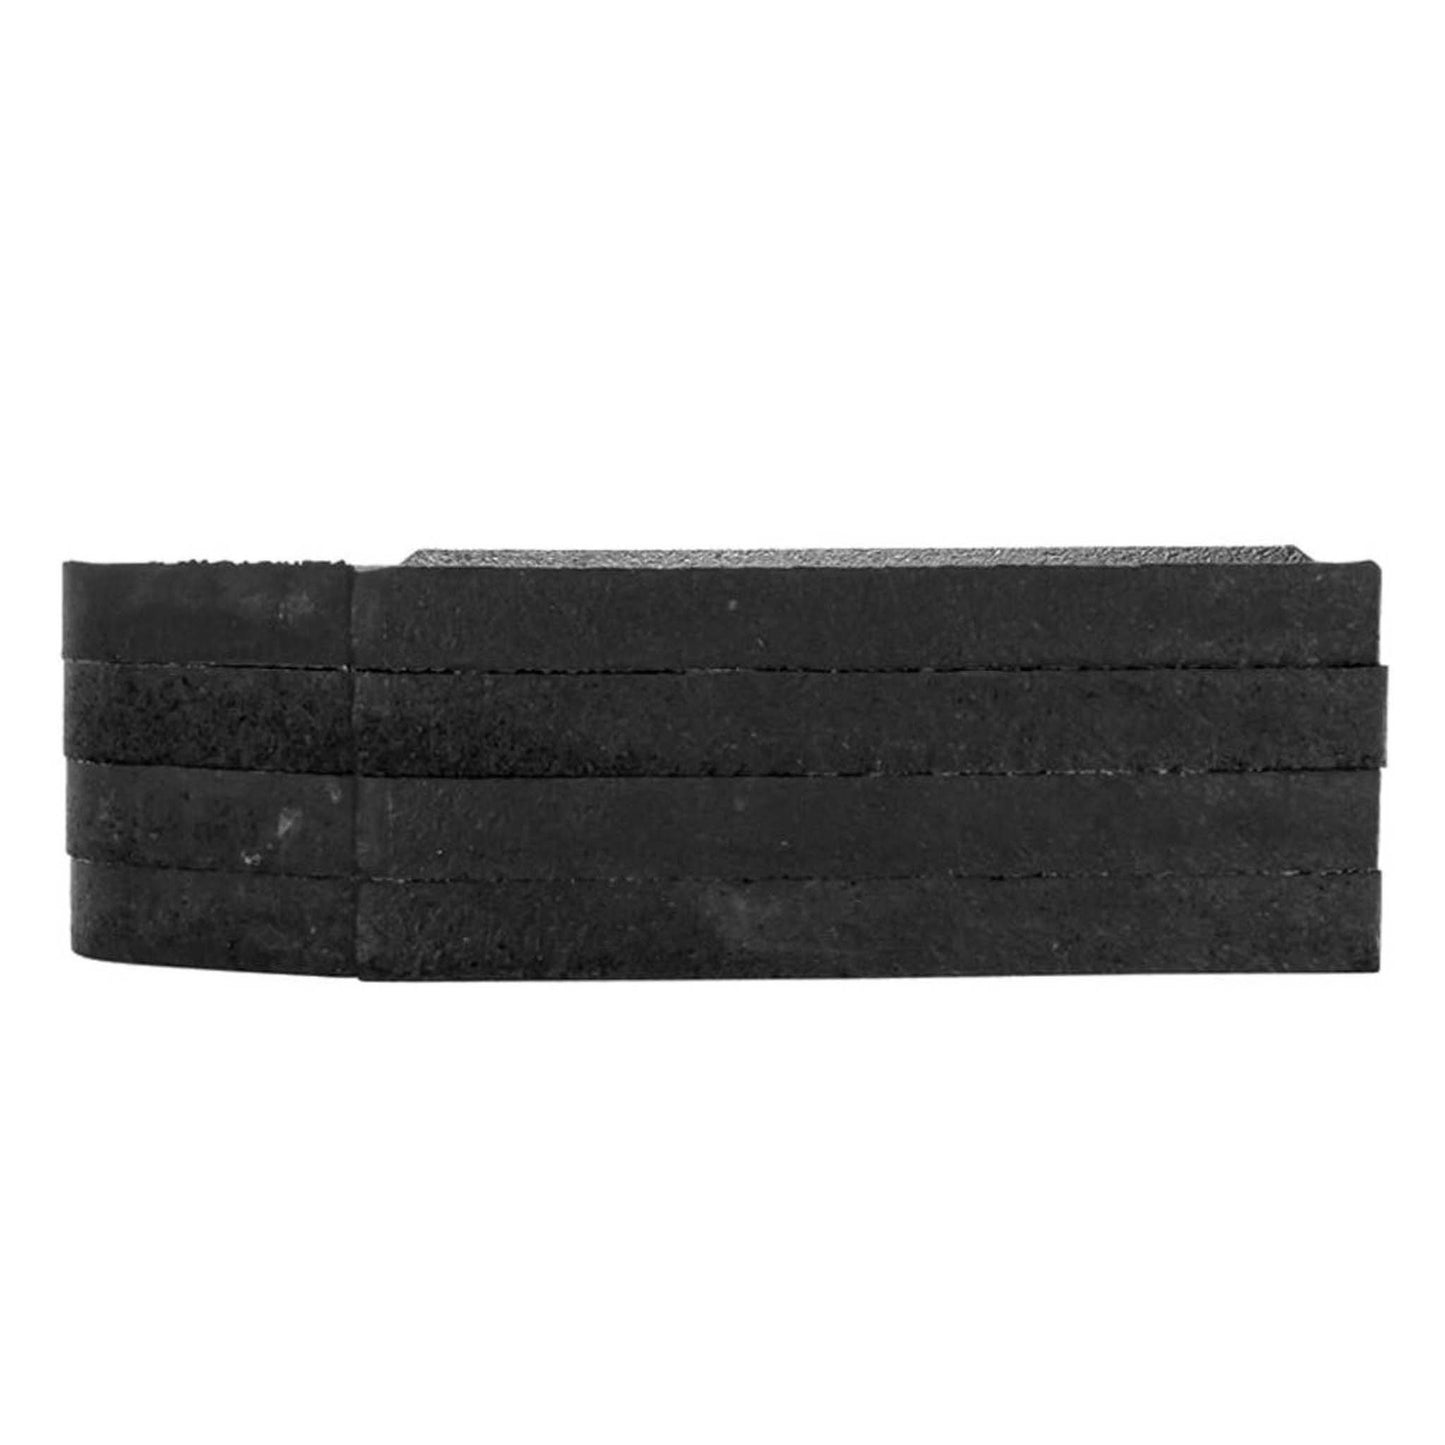 Stabilizer Jack Pad - Rubber (6.2"x6.2"pad) 4-pack